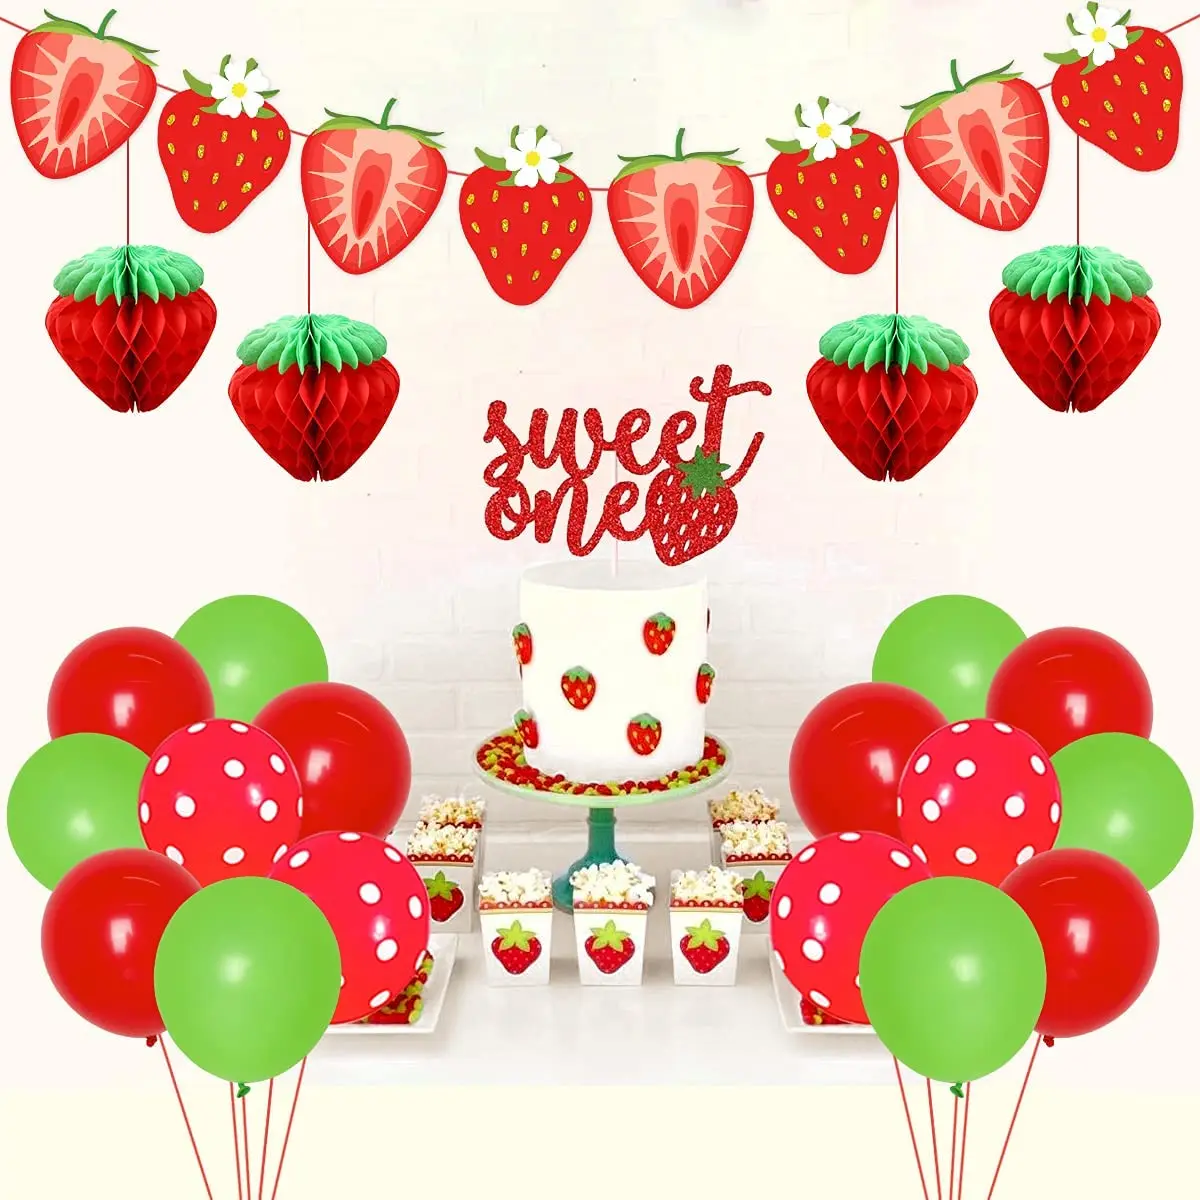 STRAWBERRY BIRTHDAY Table CENTERPIECE Berry Sweet to Be 3 Fruit Birthday  Decorations Pink Strawberry Decor Strawberry Bday Party Theme 